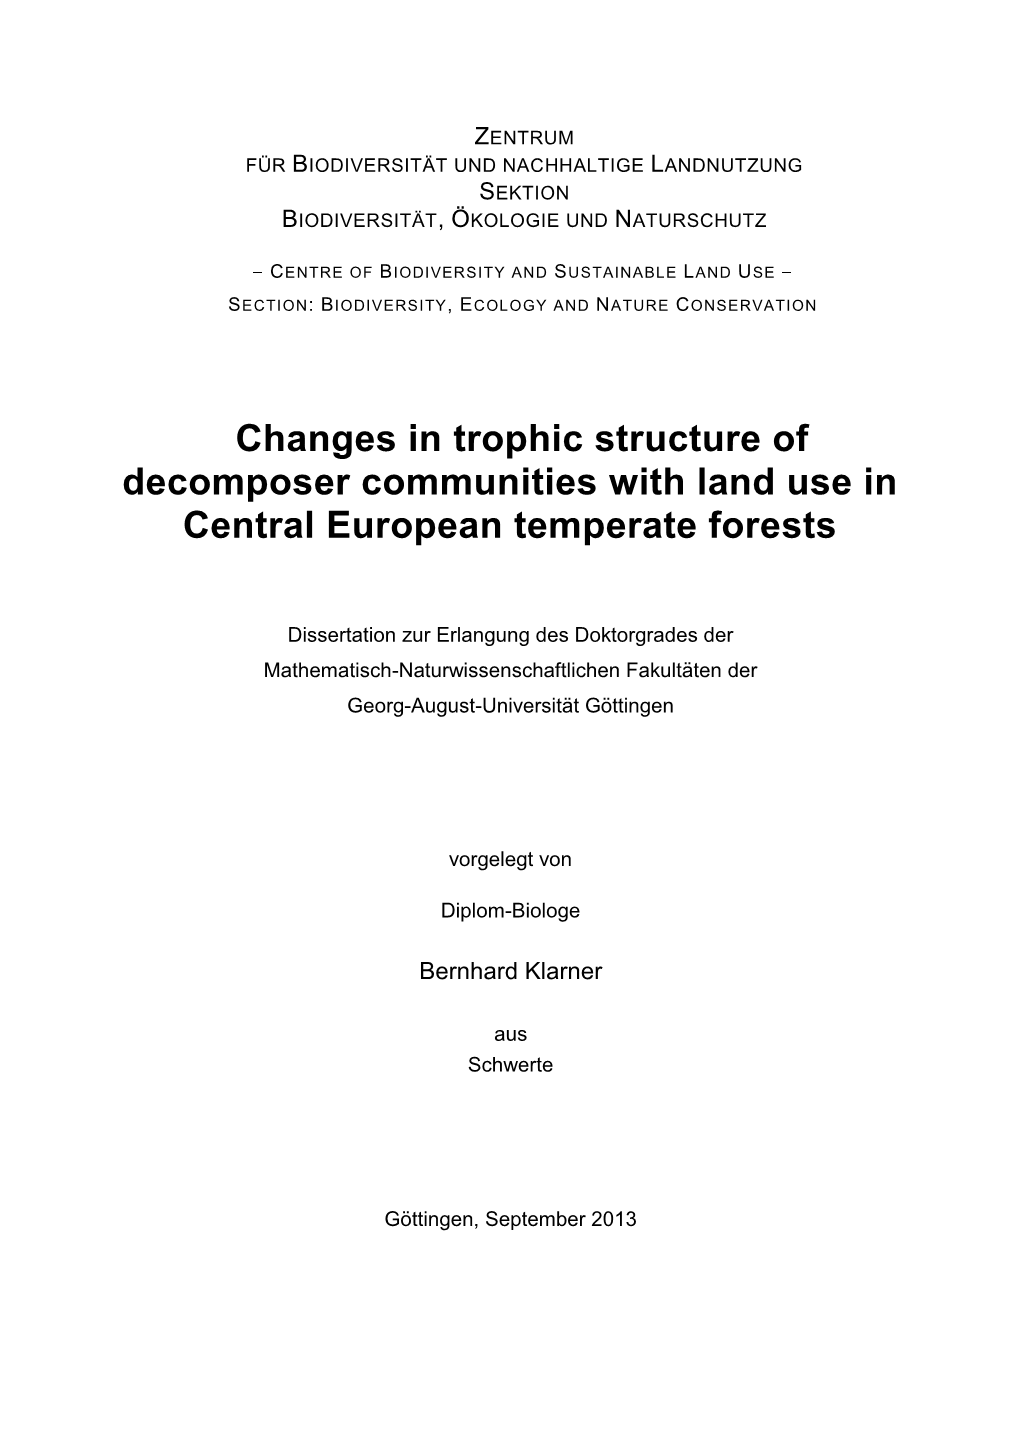 Changes in Trophic Structure of Decomposer Communities with Land Use in Central European Temperate Forests